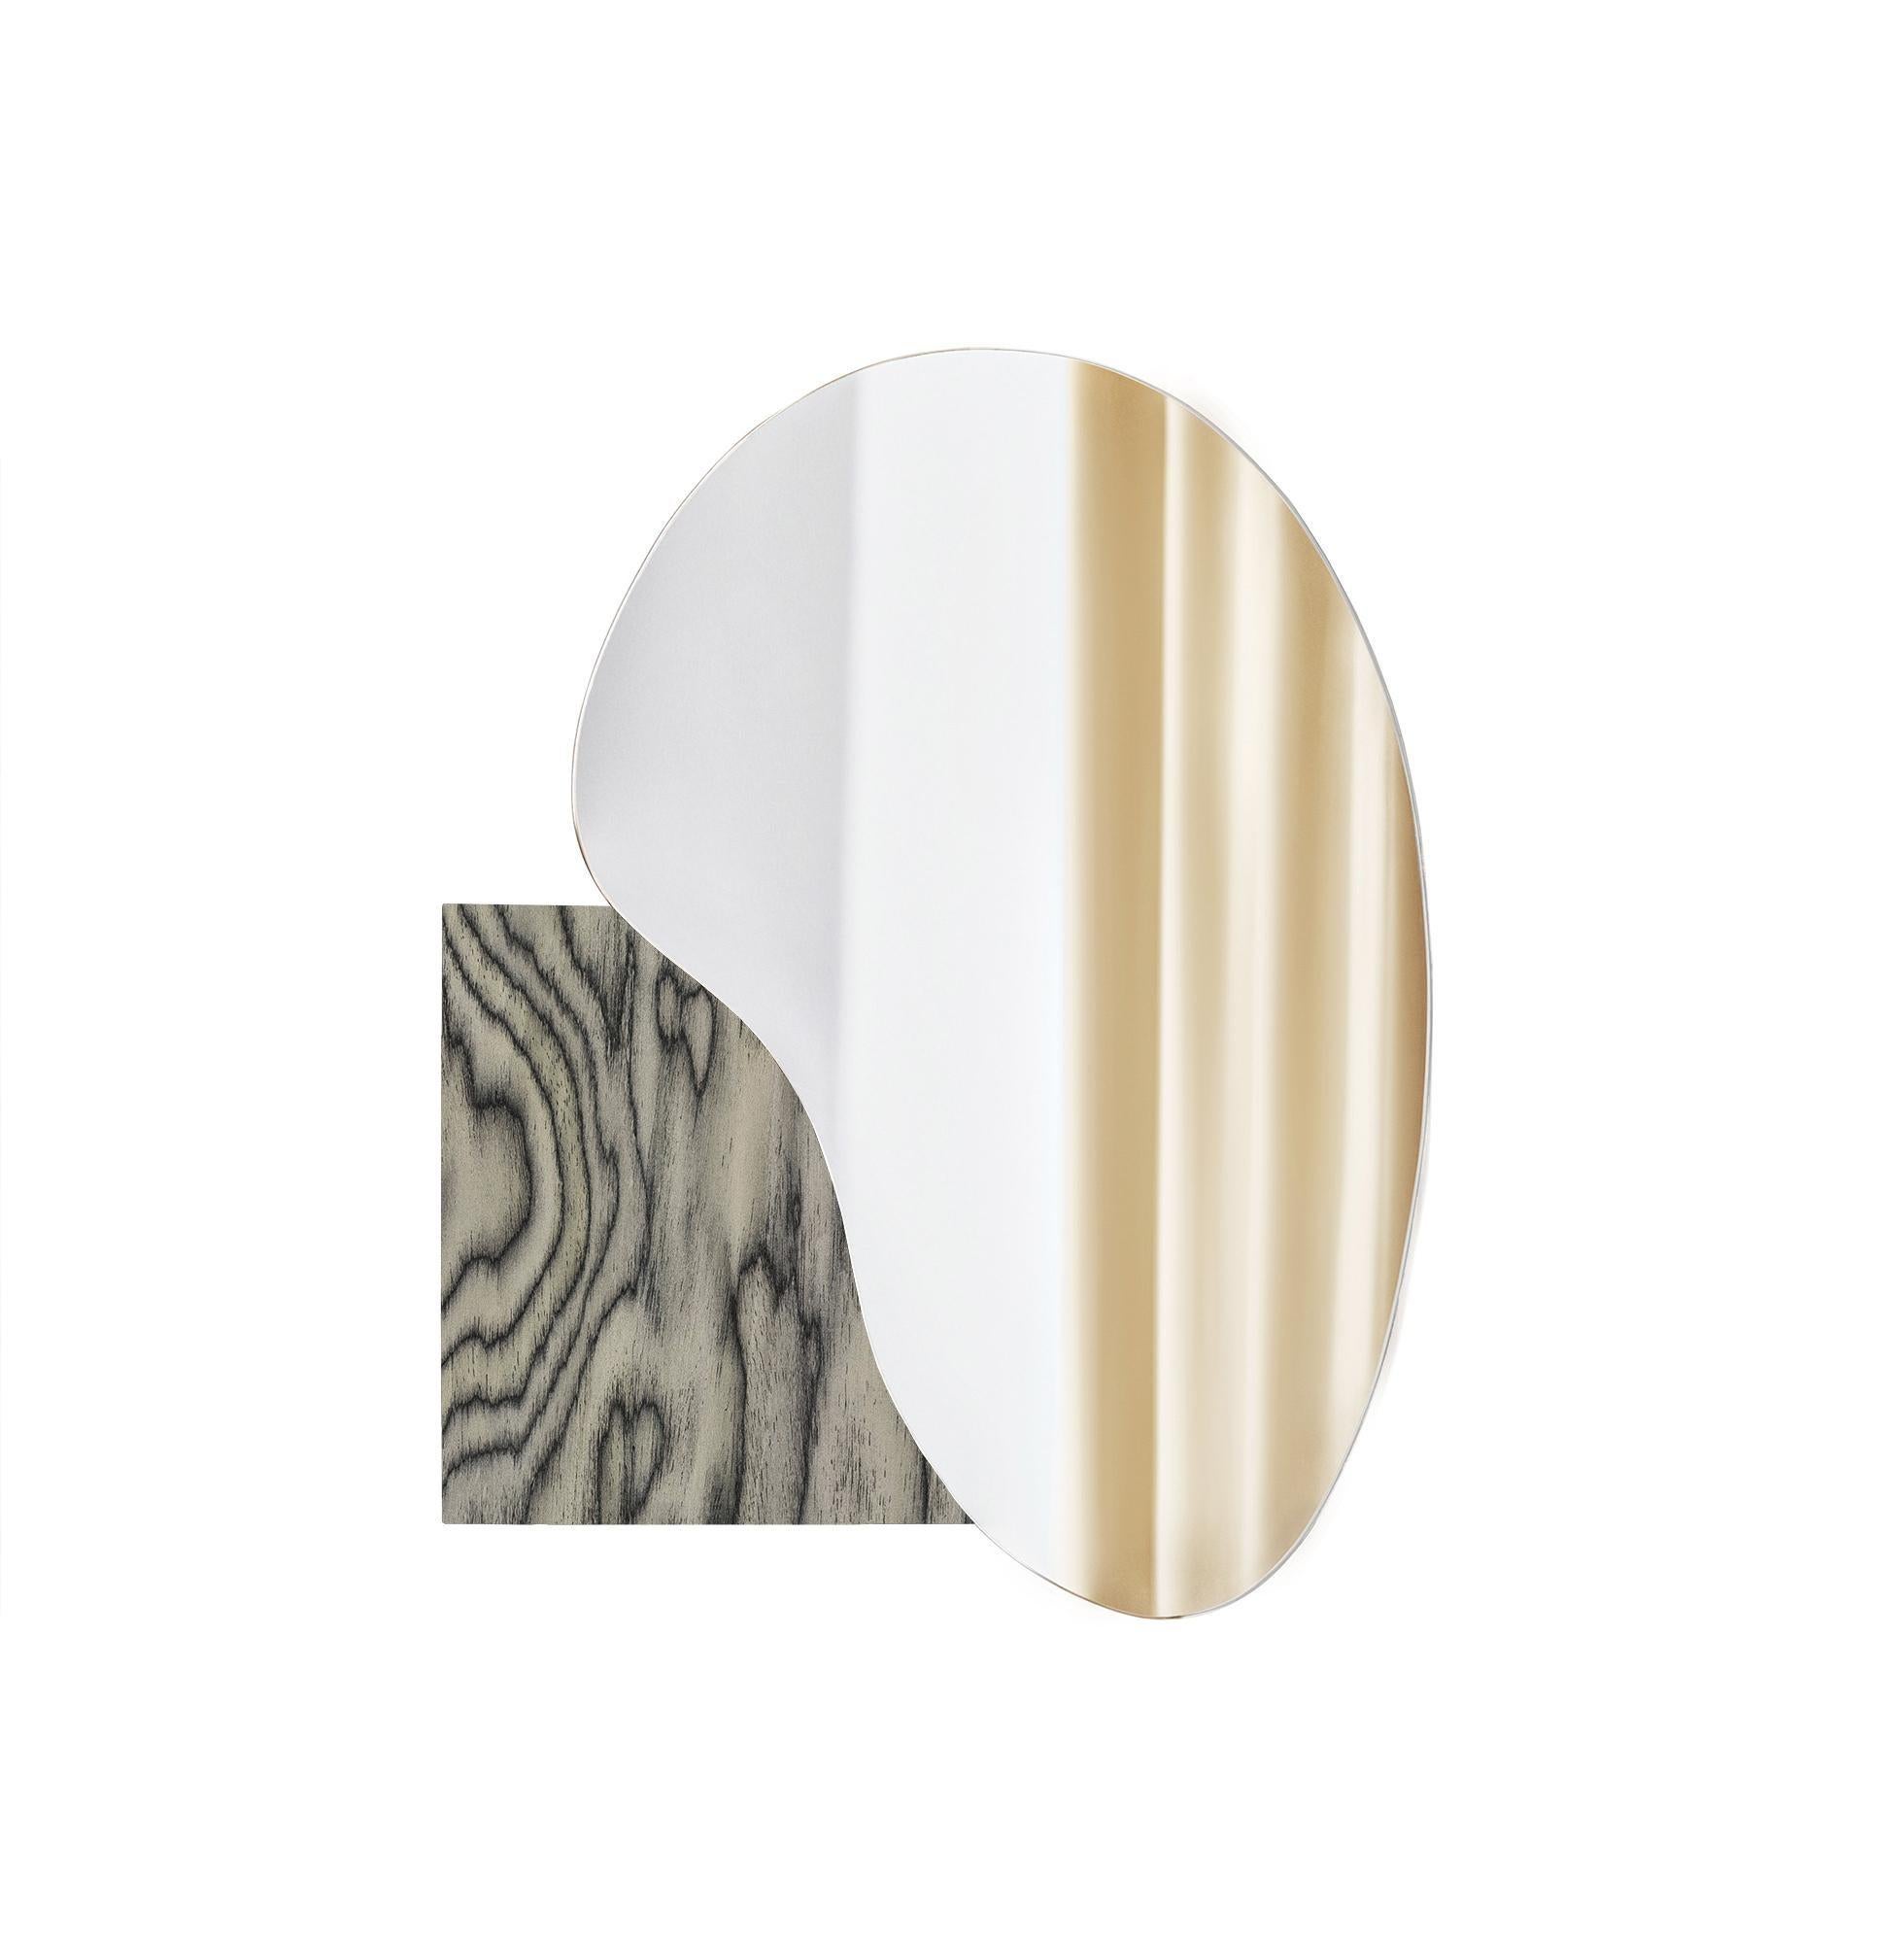 Brushed Contemporary Wall Mirror 'Lake 4' by Noom, ALPI Wood Veneer For Sale